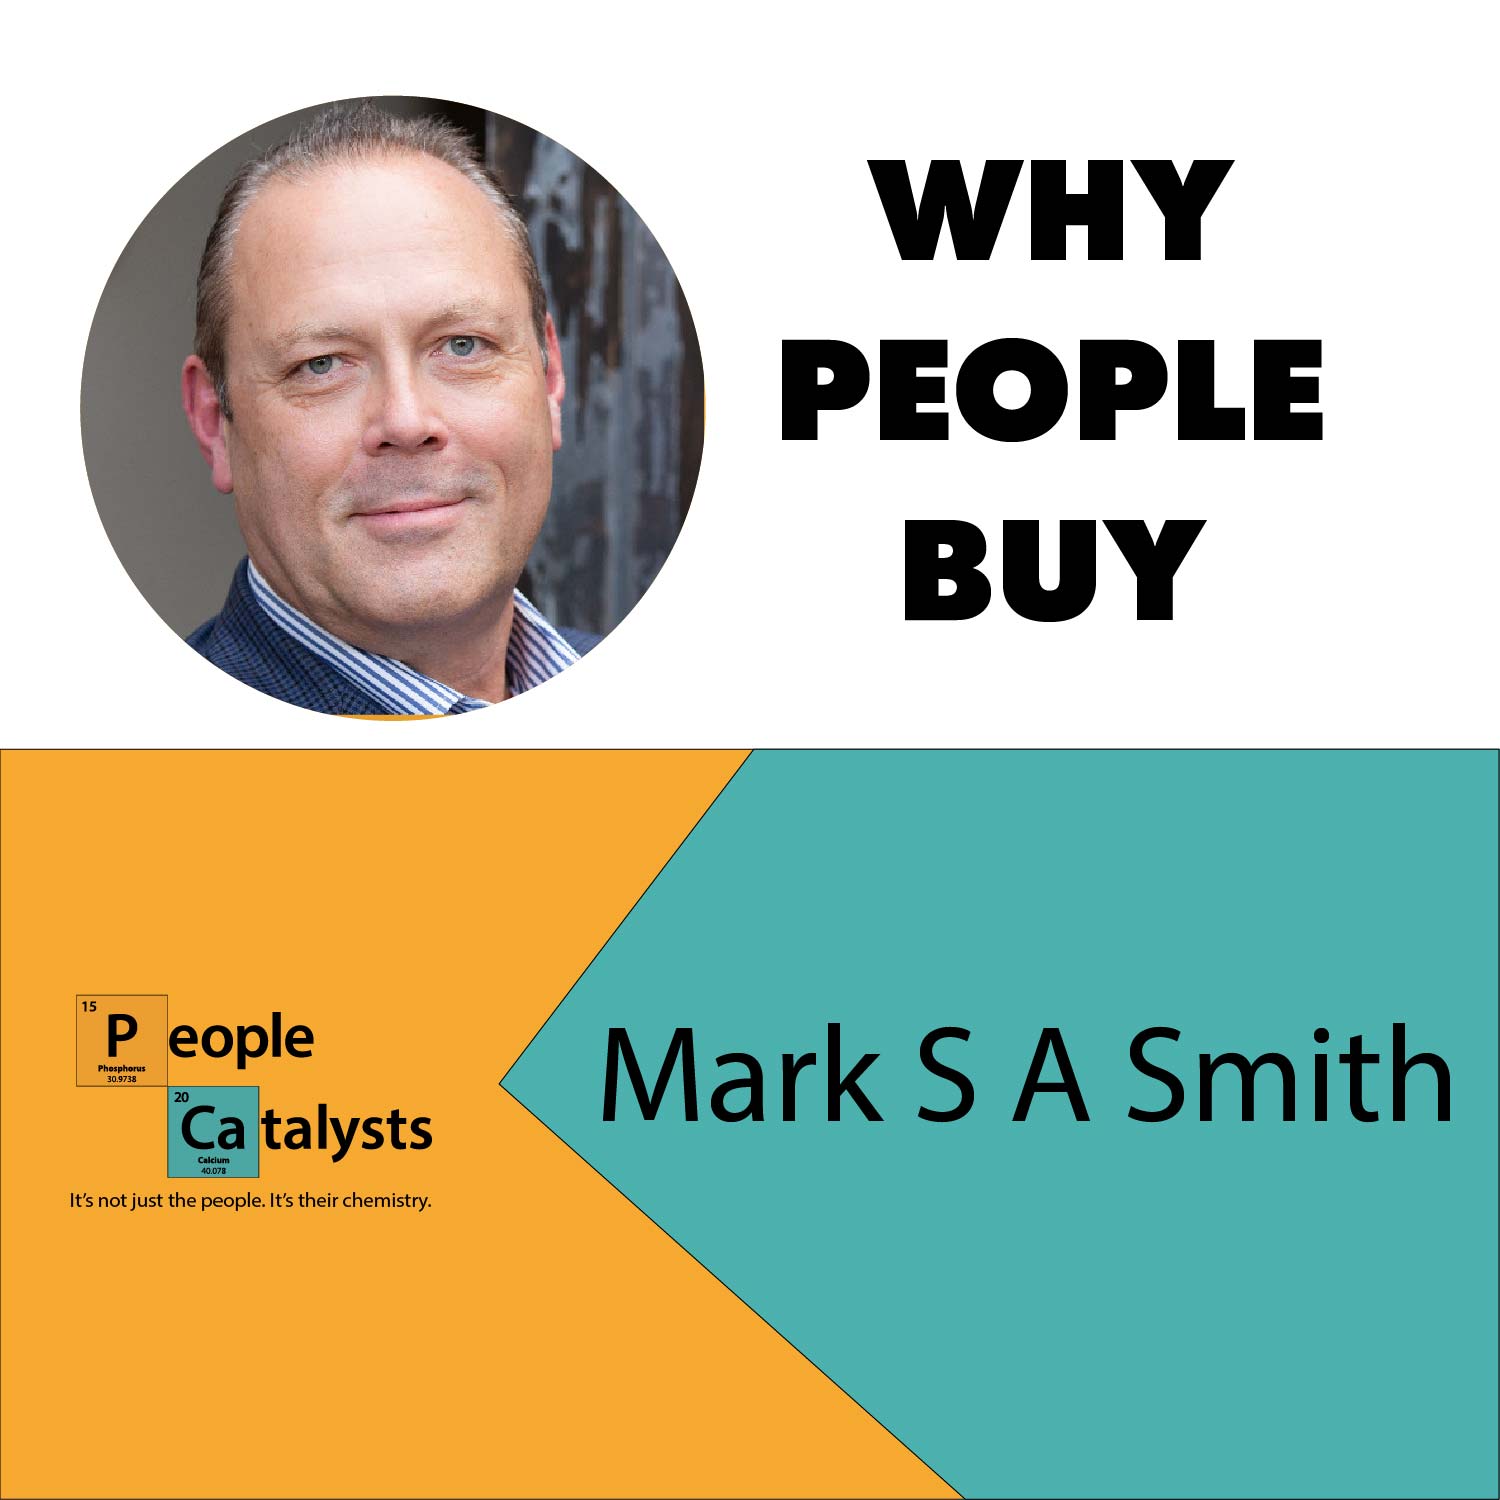 Graphic: Title: WHY PEOPLE BUY with photo of Mark S A Smith